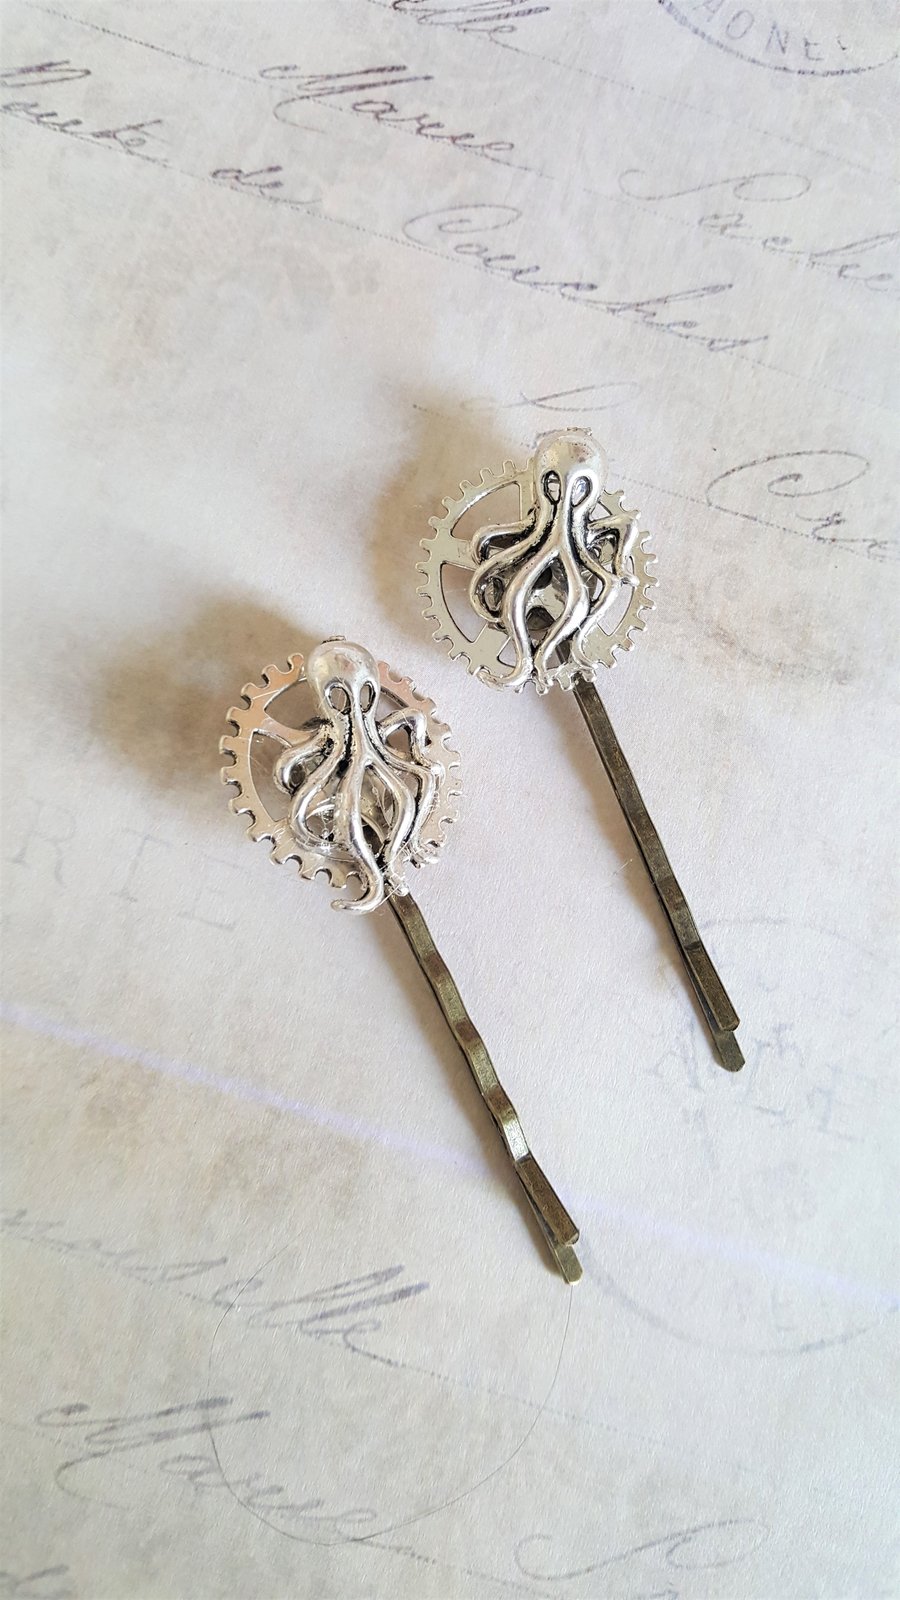 Steampunk Hair Grip Bobby Pin Jules Verne Octopus And Gears